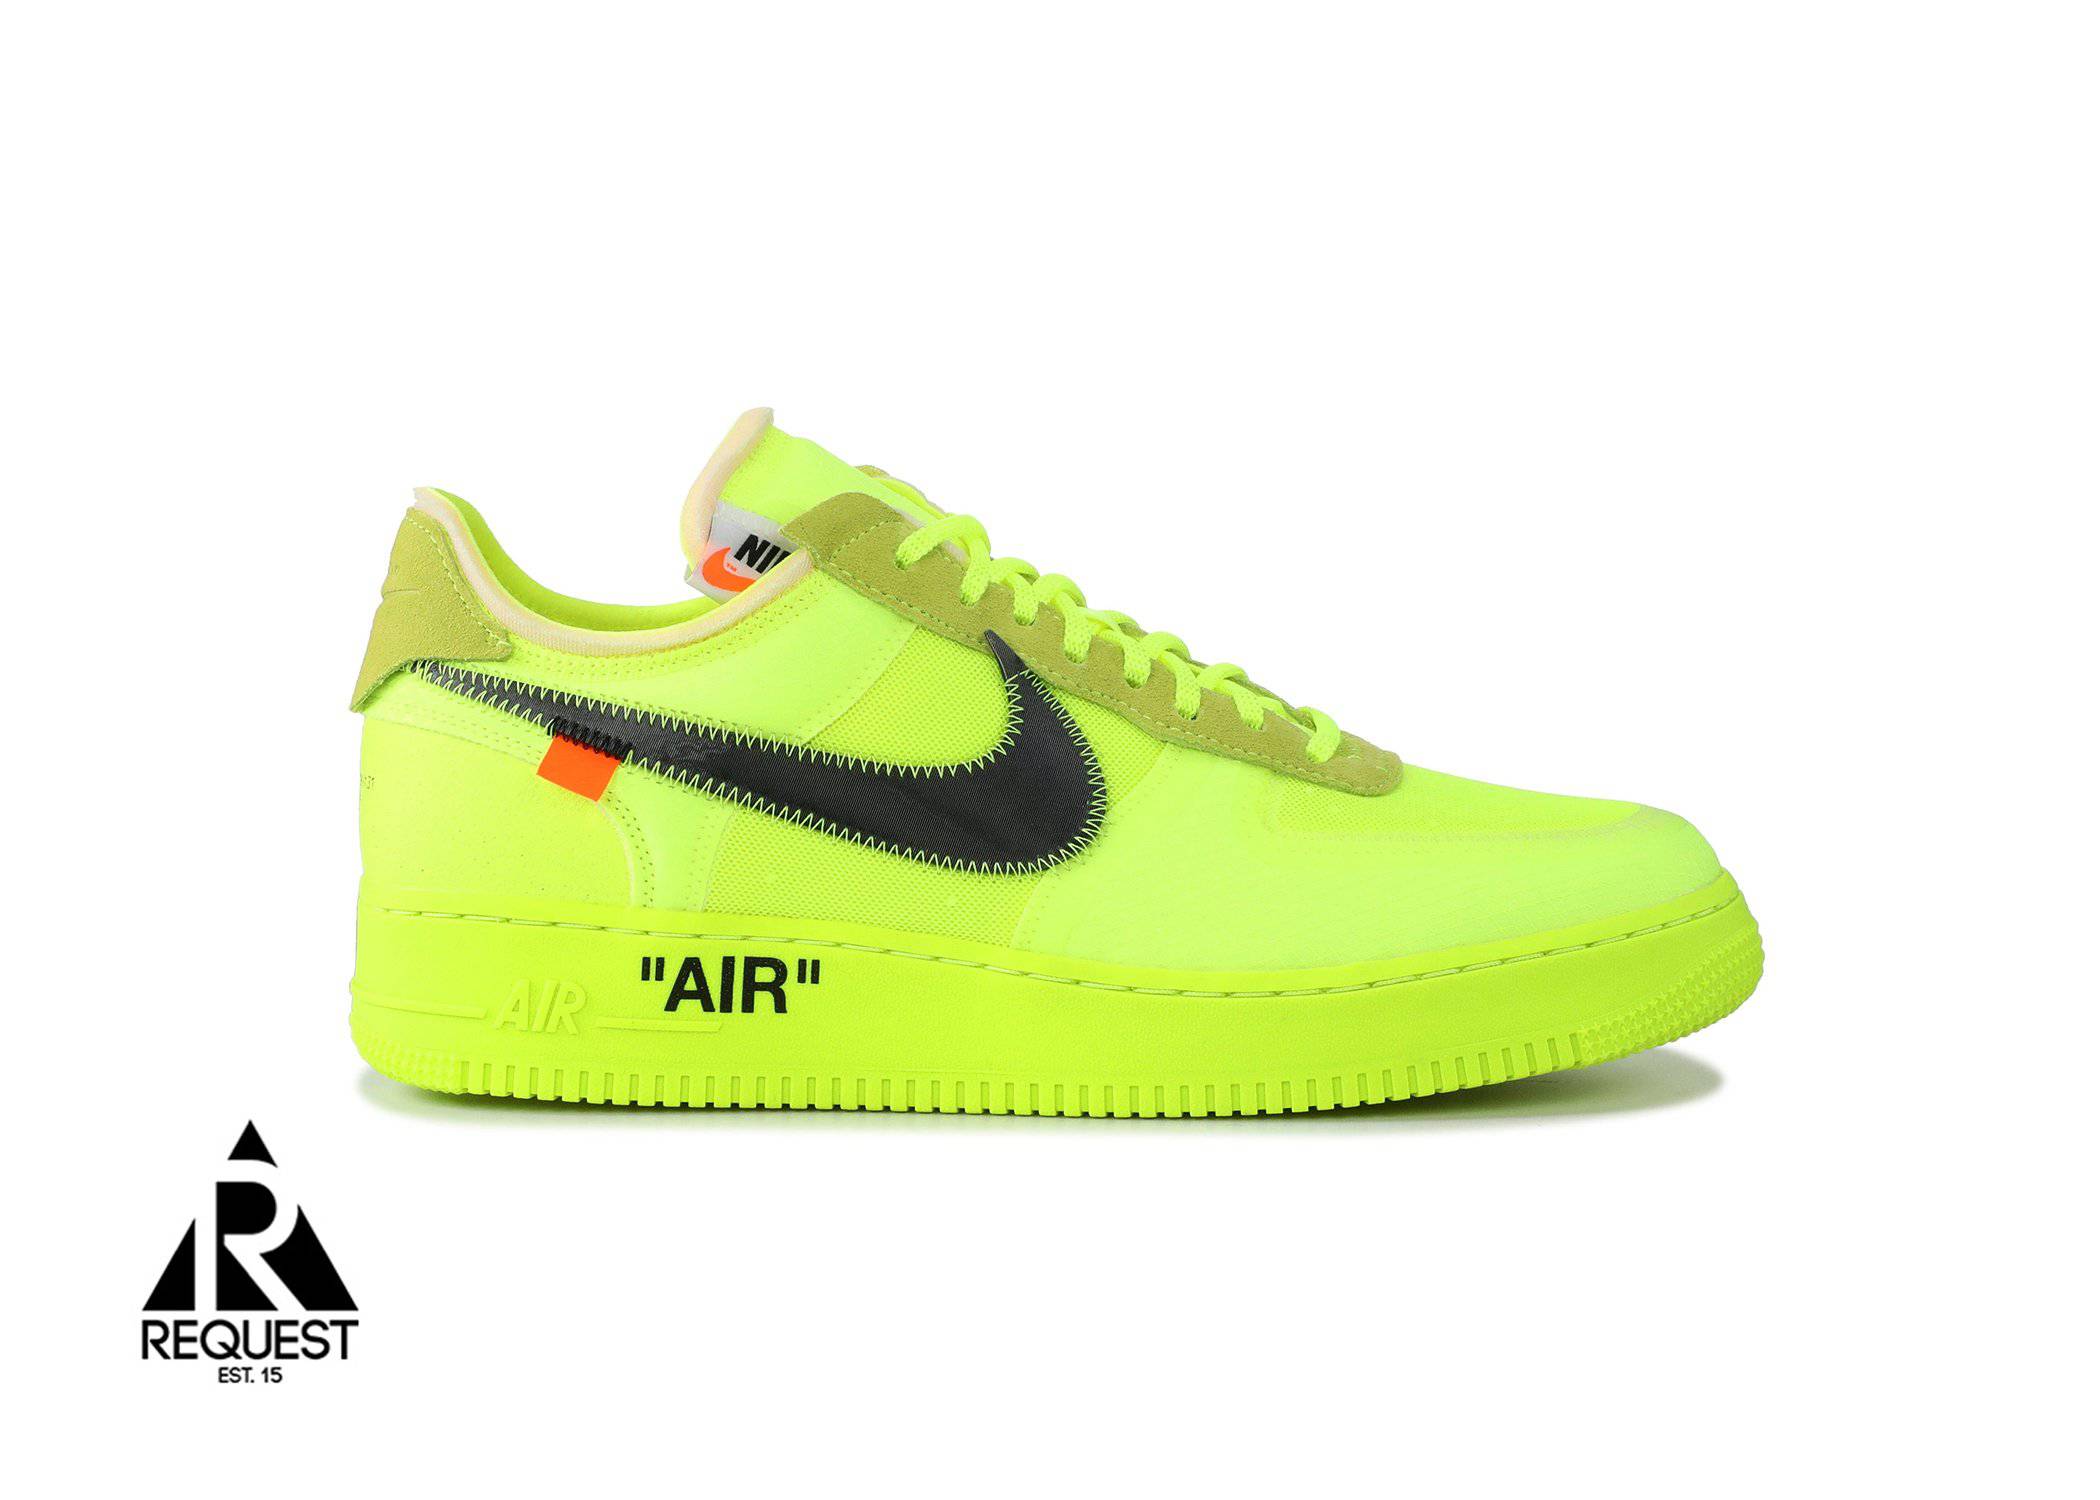 Nike Off White Air Force 1 Low “Complexcon”